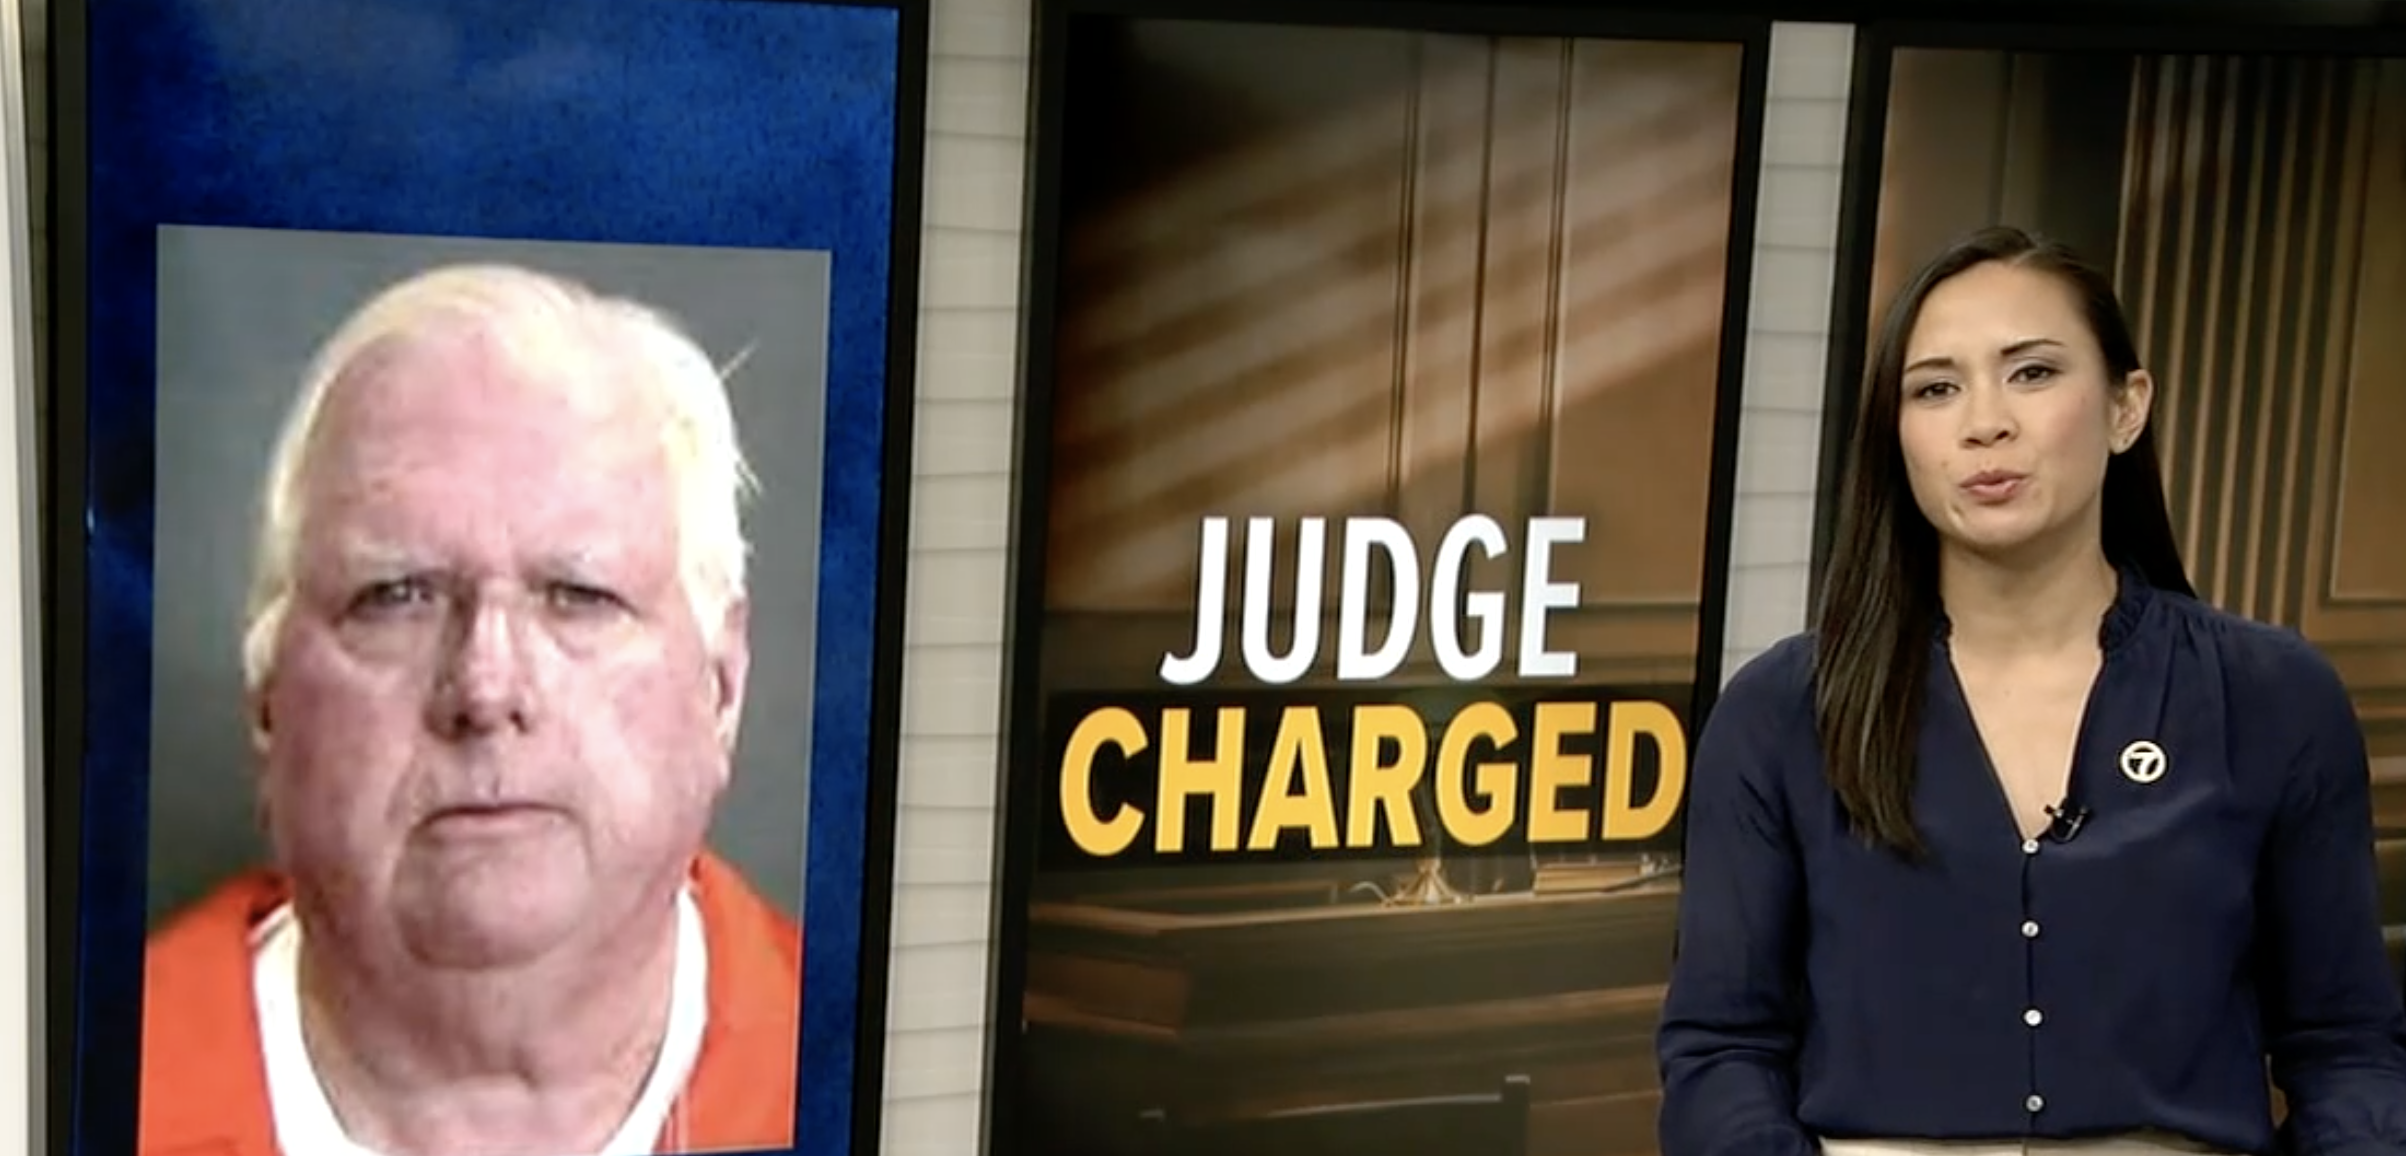 The judge who shot his wife and apologized to coworkers about it.